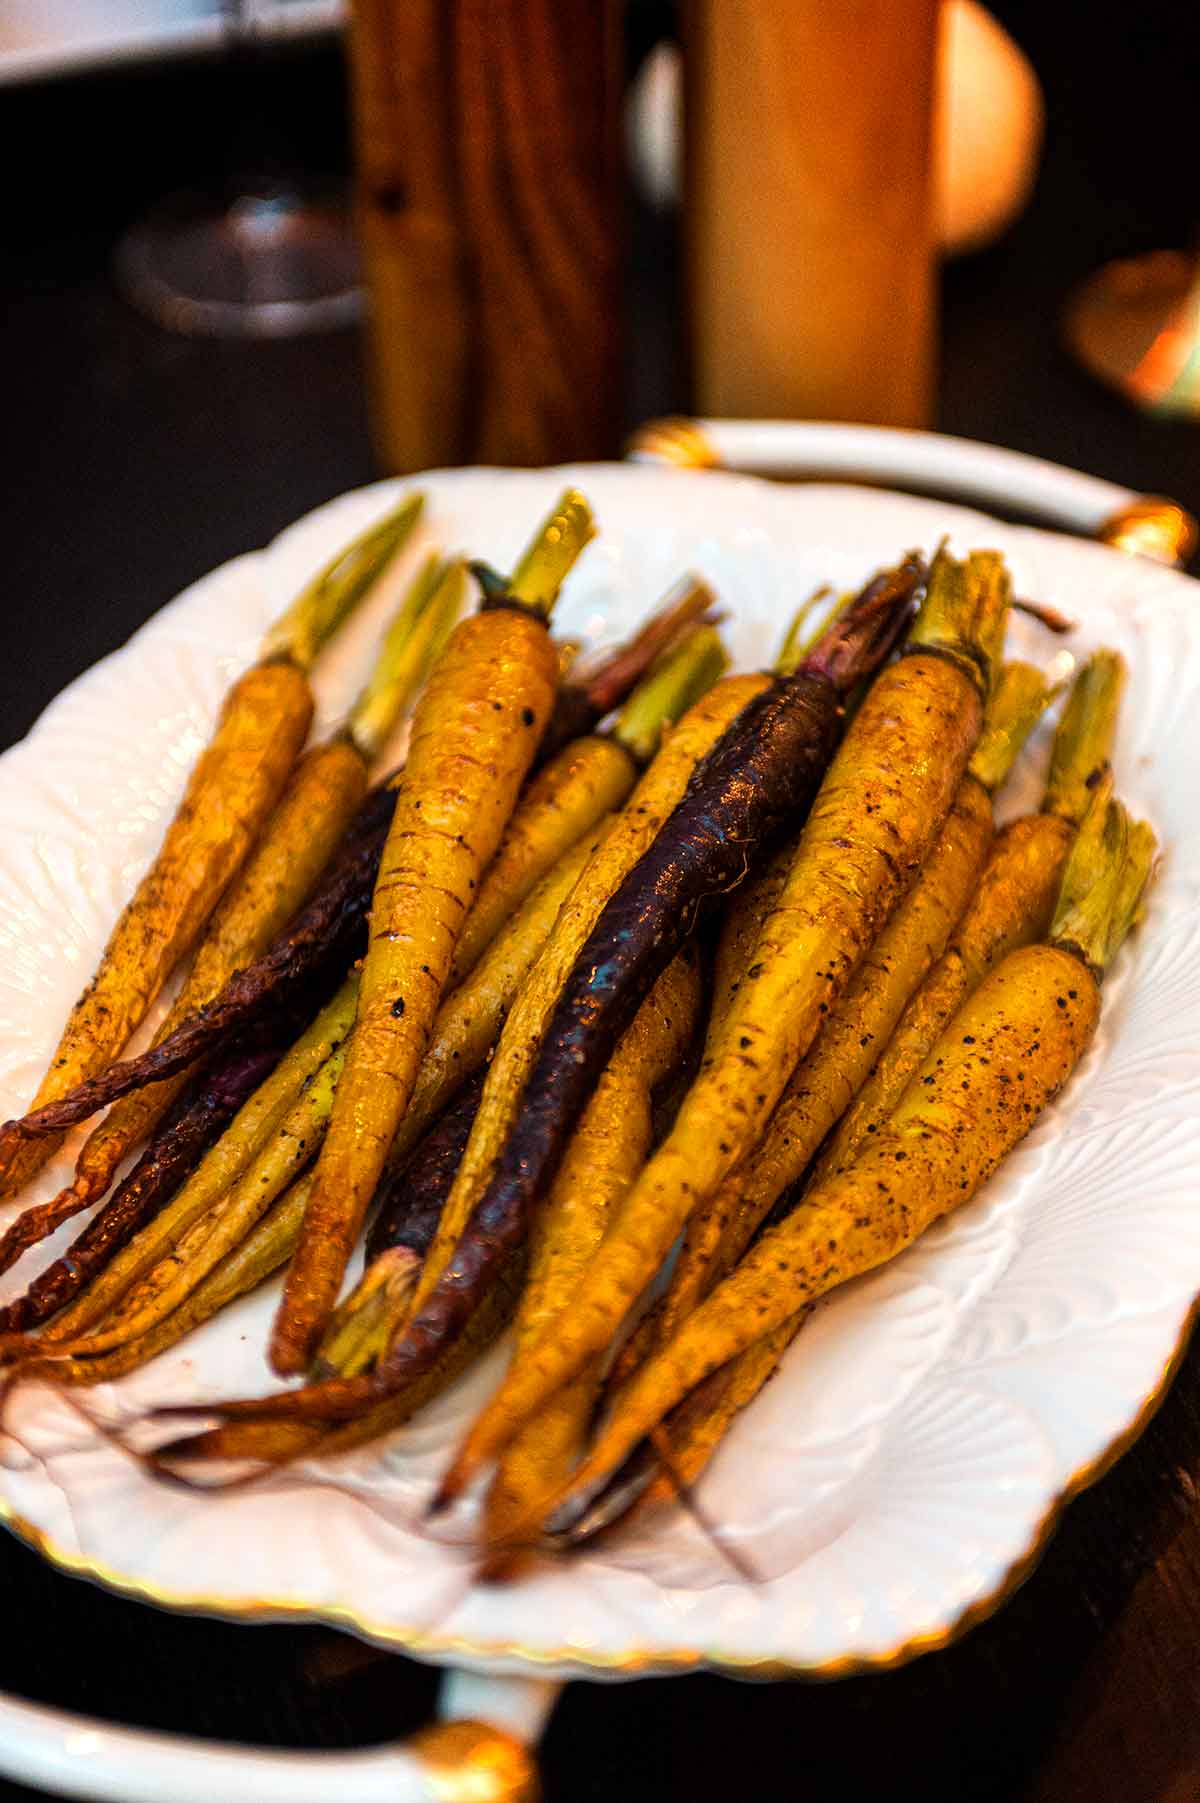 A plate of roasted carrots on a table.